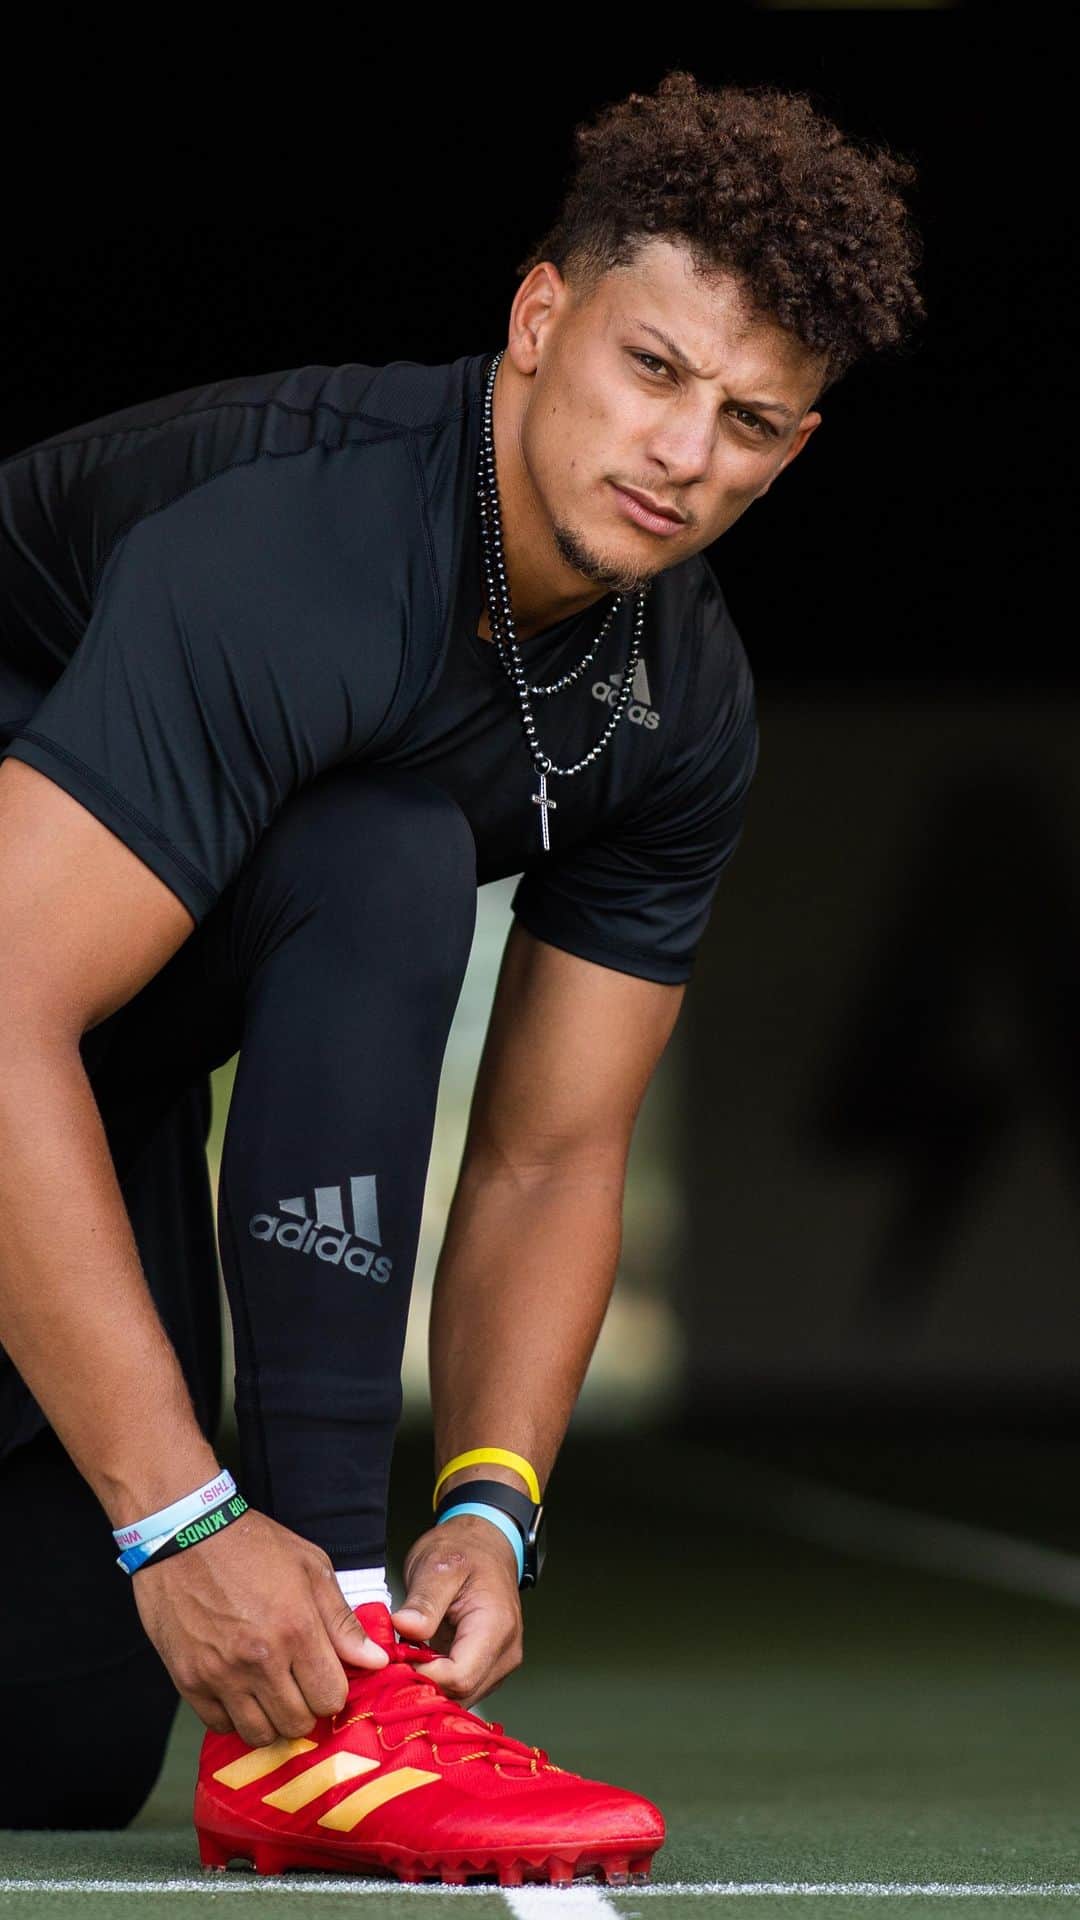 adidasのインスタグラム：「“We're going to be taking action and making change in this world so it's a better place when we leave it." ⁣ ⁣ @patrickmahomes stood out to change the game, now he's standing up to change the world. ⁣ ⁣ #ReadyForSport⁣」